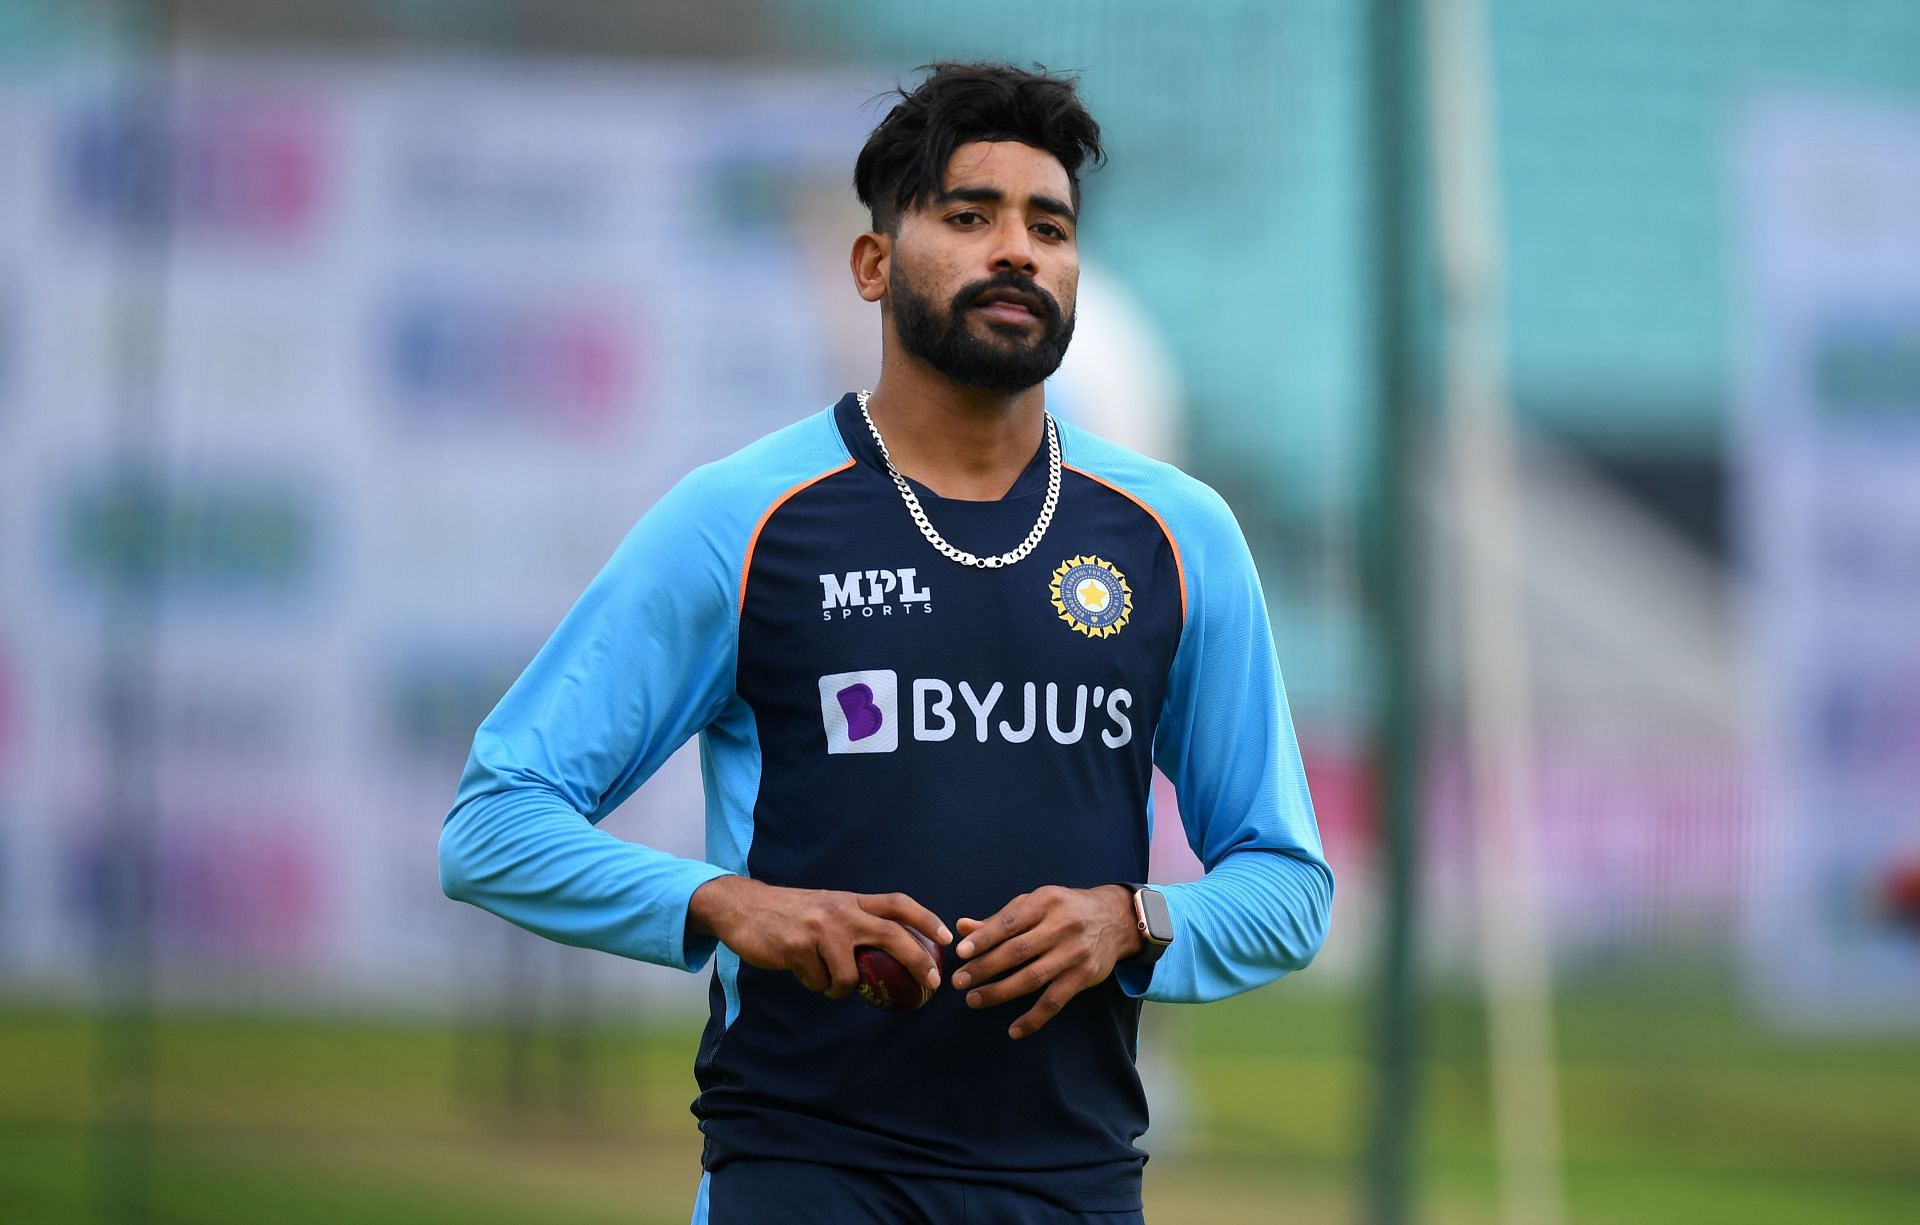 This year was a bad phase for me" - Mohammed Siraj optimistic about strong  comeback after dismal IPL 2022 campaign